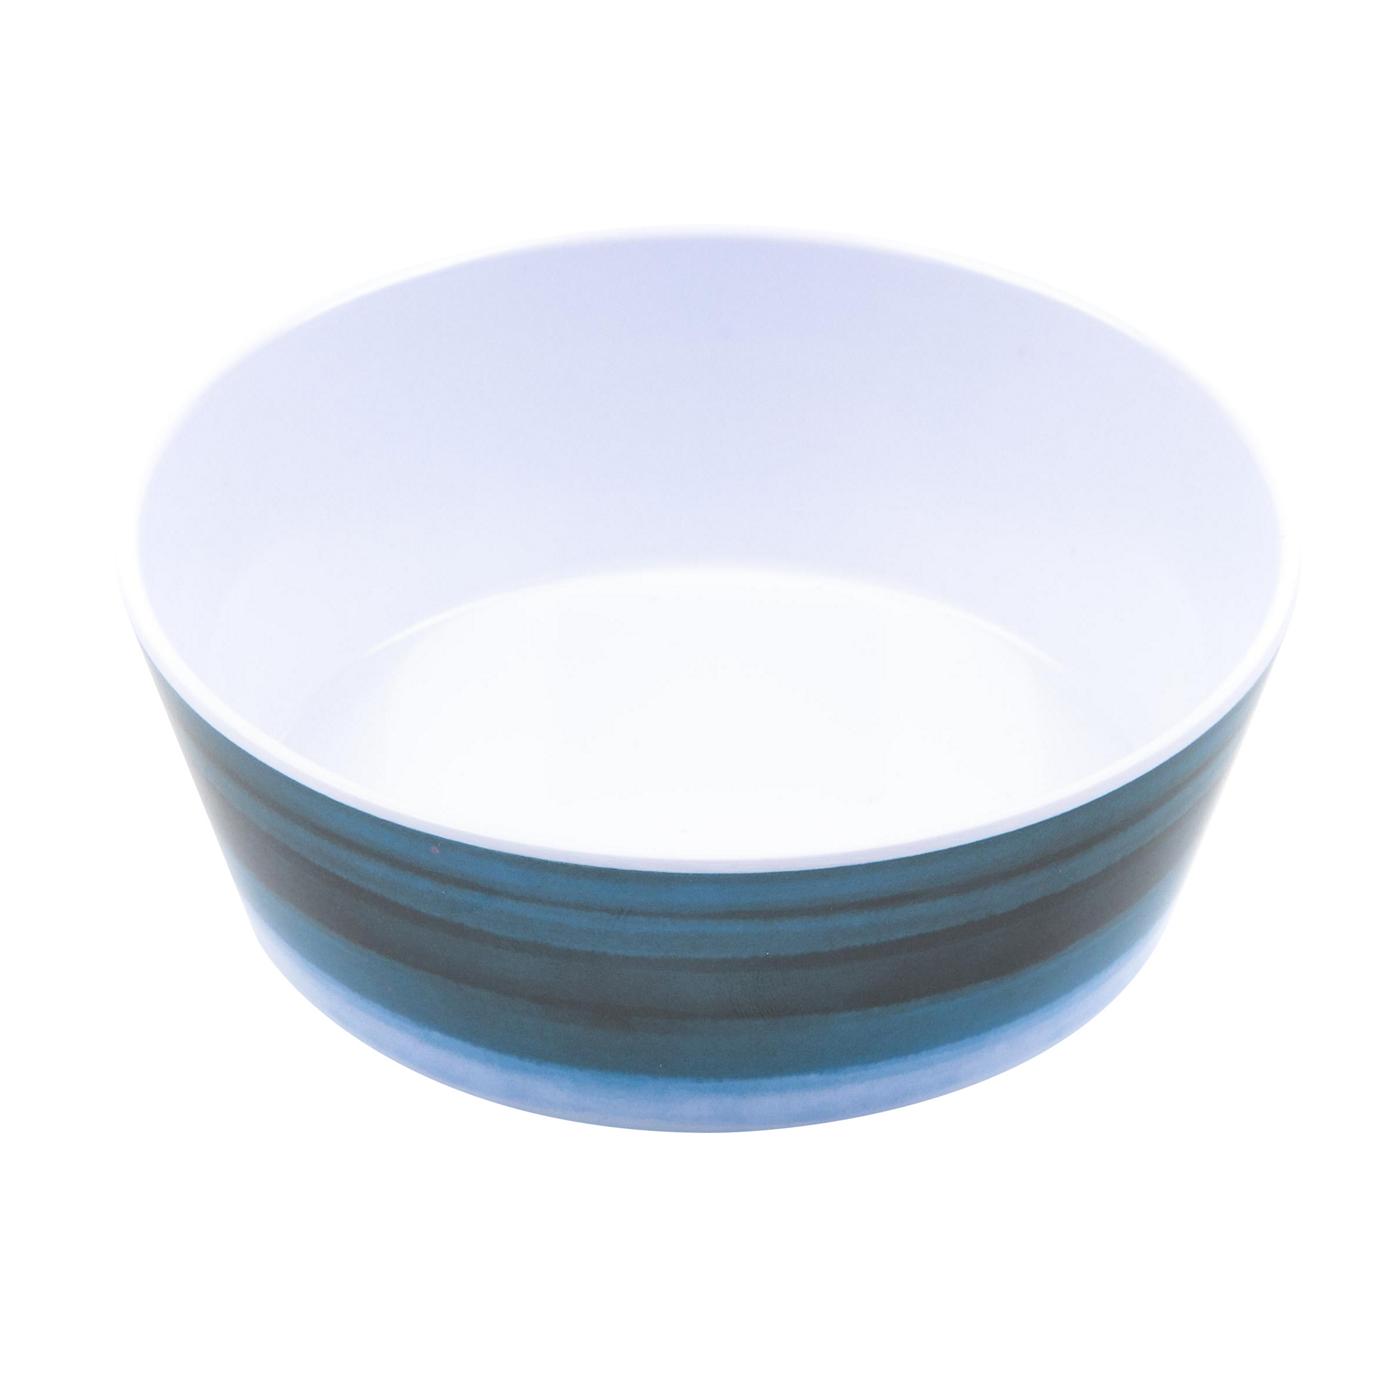 Woof & Whiskers 32 oz Melamine Pet Bowl - Blue Ombre; image 2 of 4